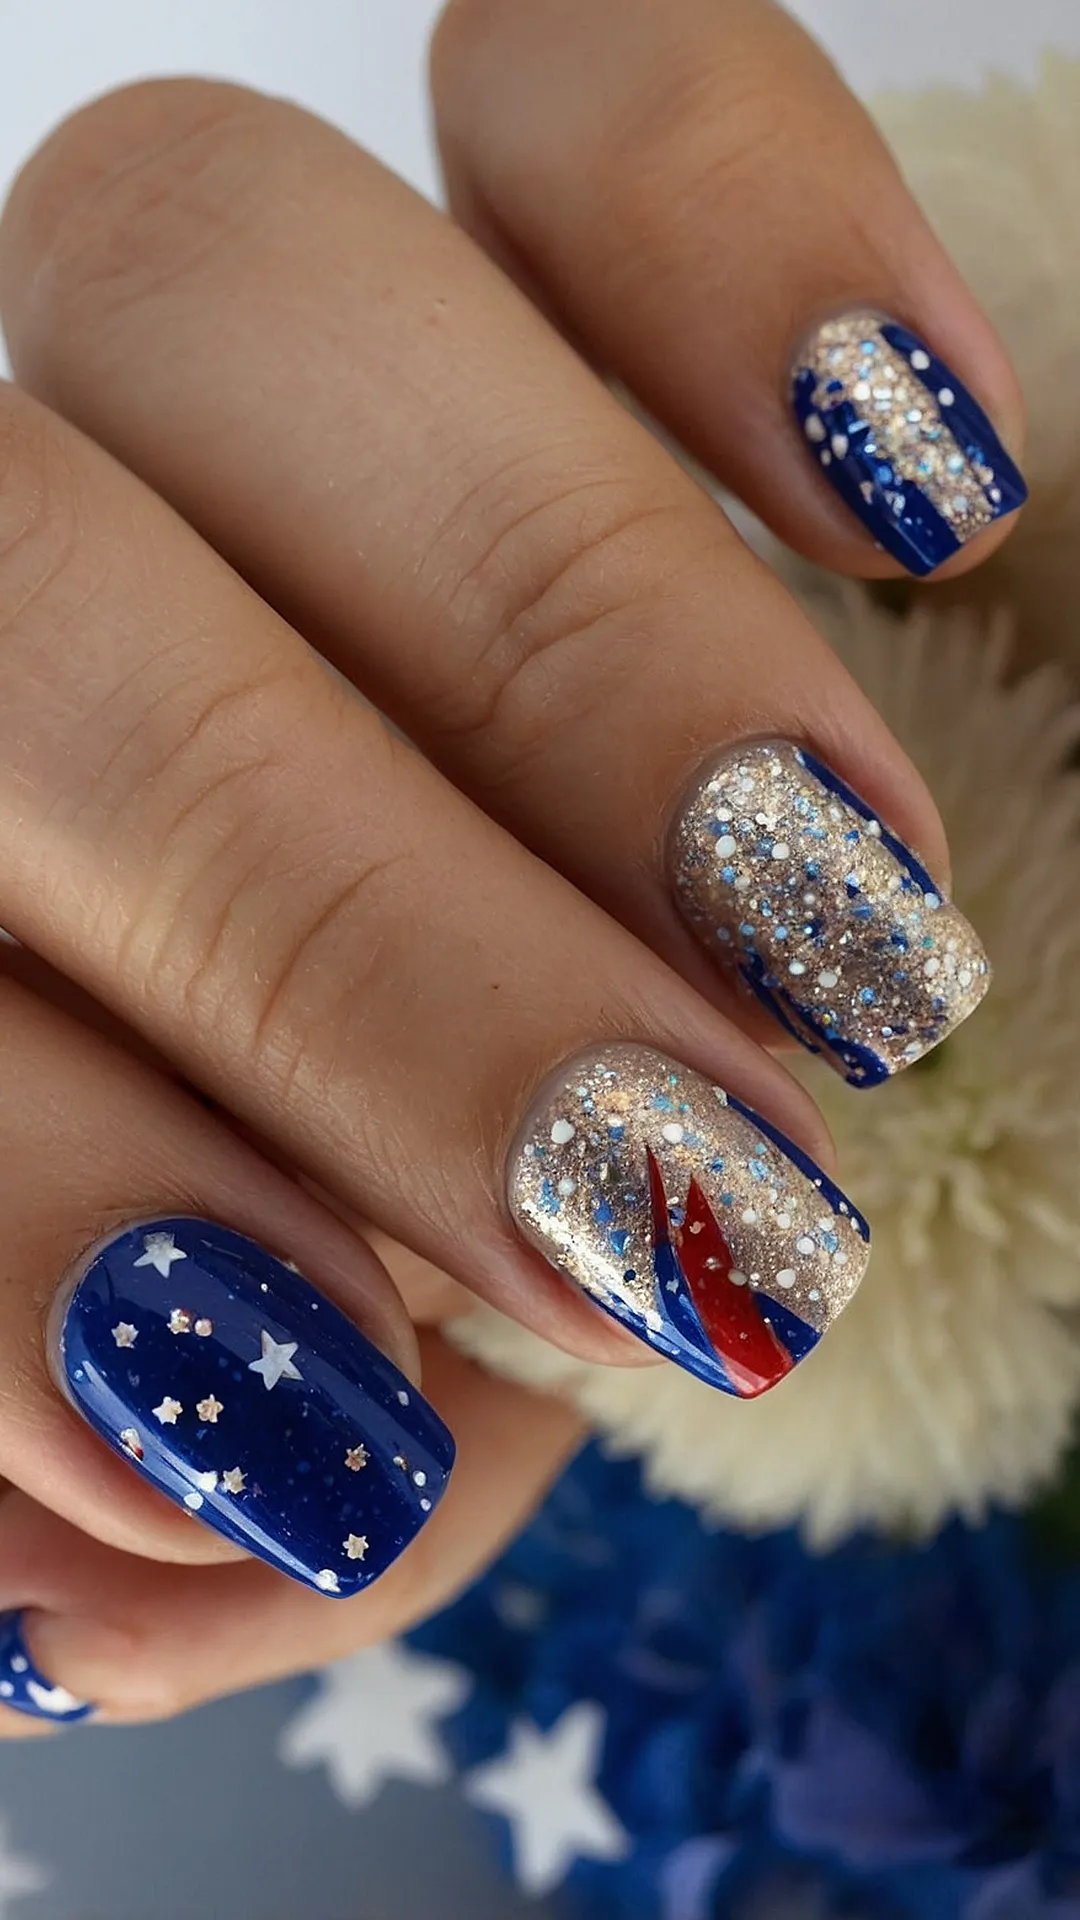 Let Freedom Ring on Your Nails: 4th of July Manicure Ideas